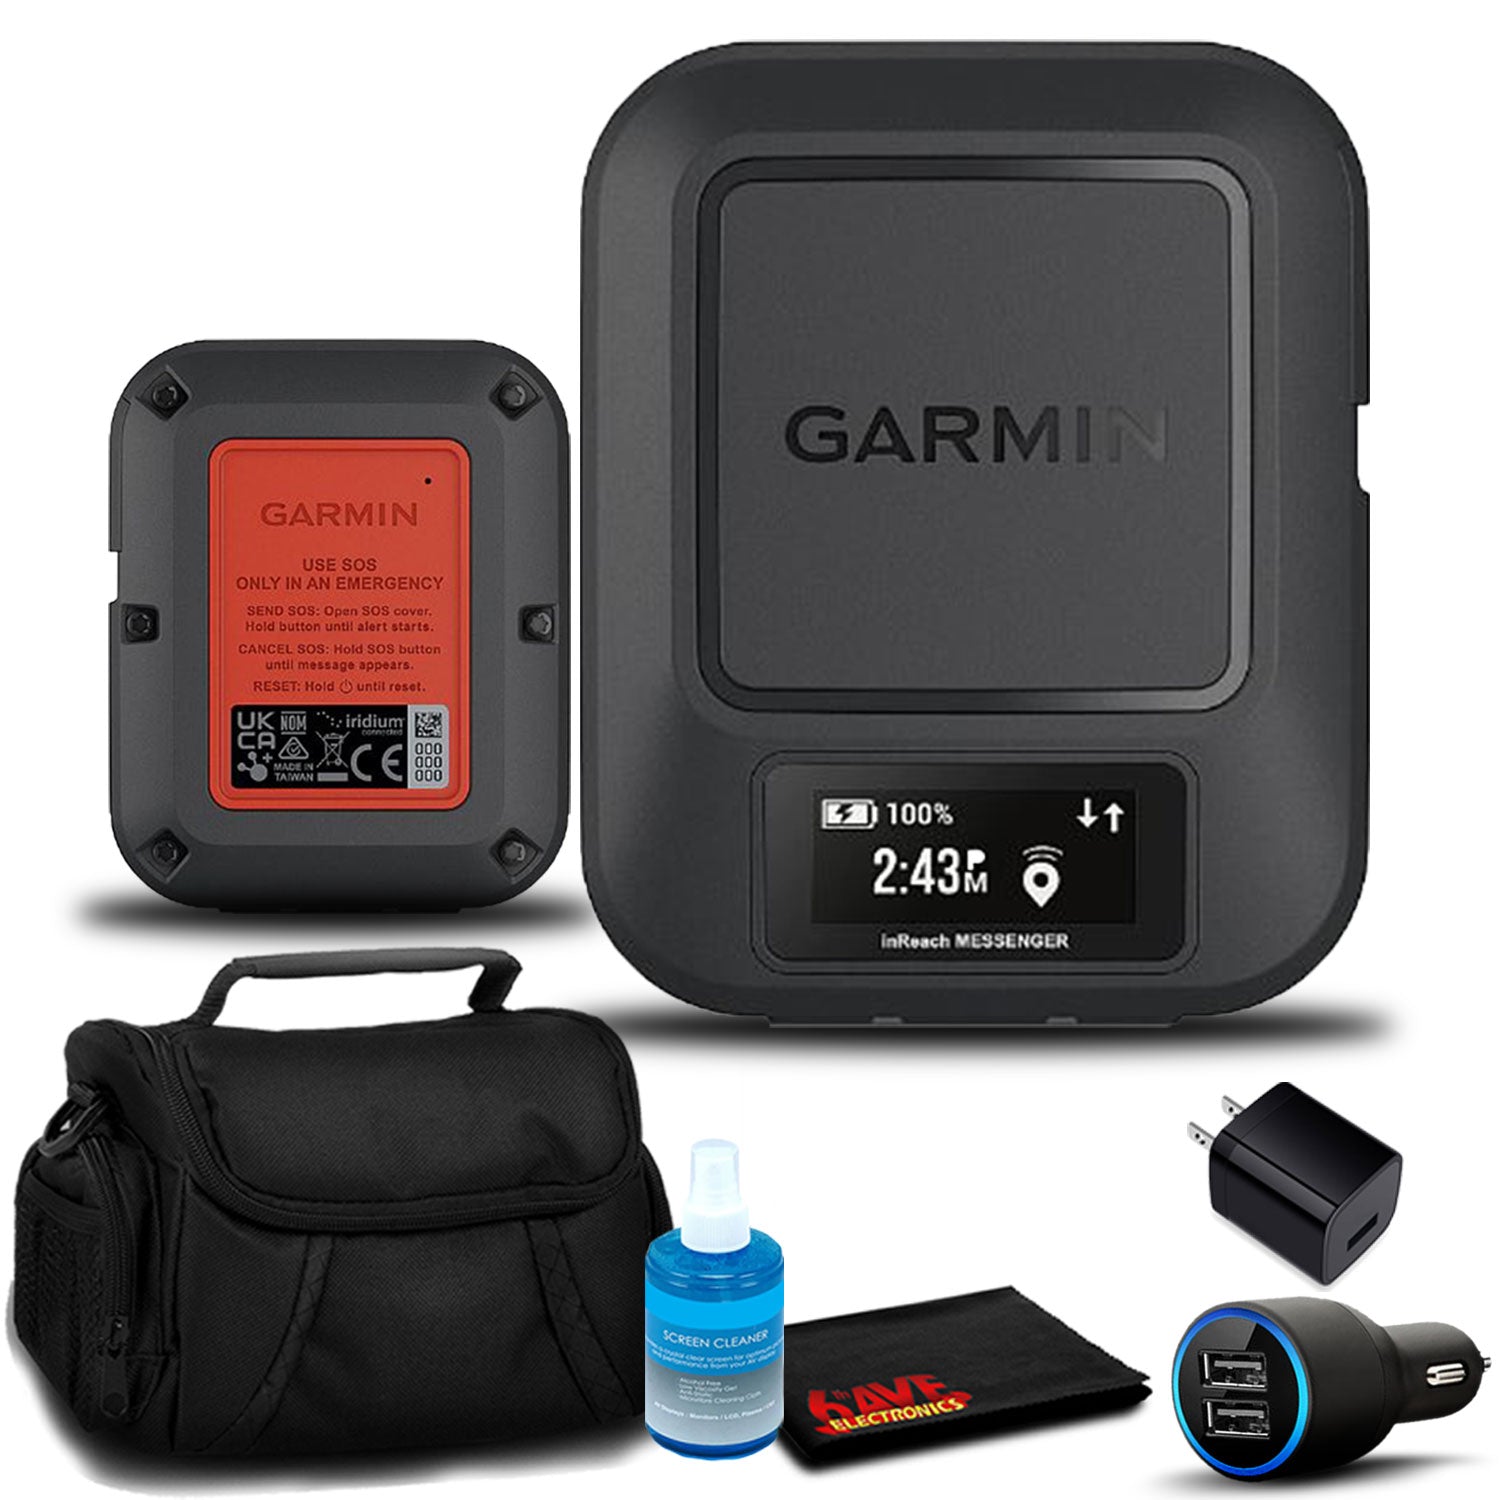 Garmin inReach Messenger GPS with Bag, Float Strap, and Adapters